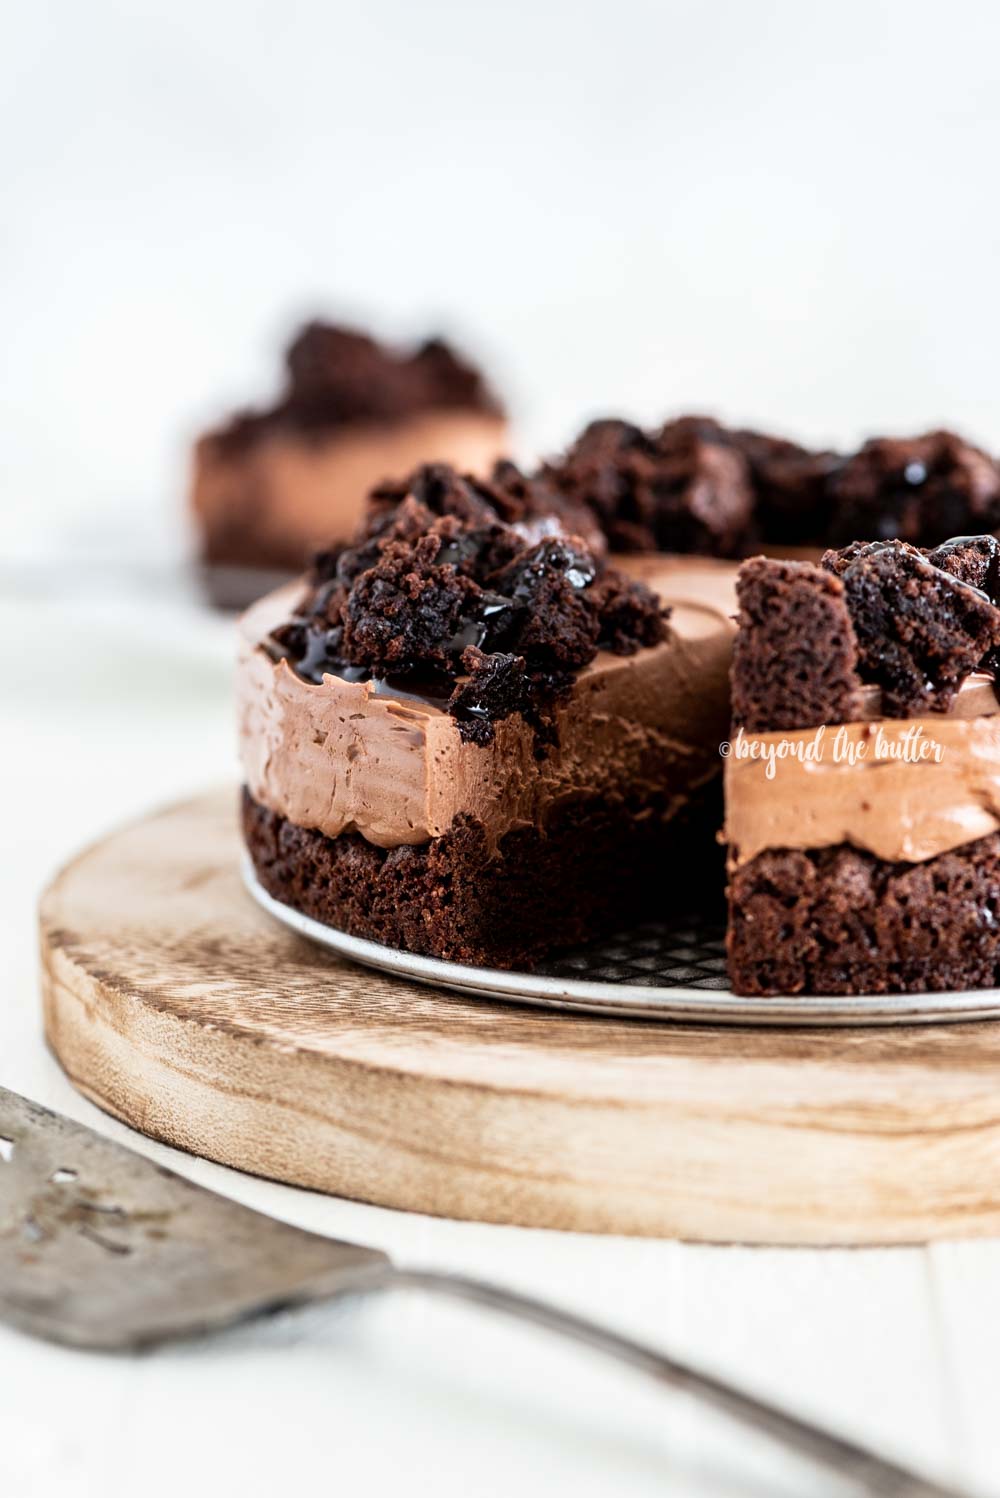 Easy Chocolate Brownie Cheesecake recipe | All Images © Beyond the Butter, LLC